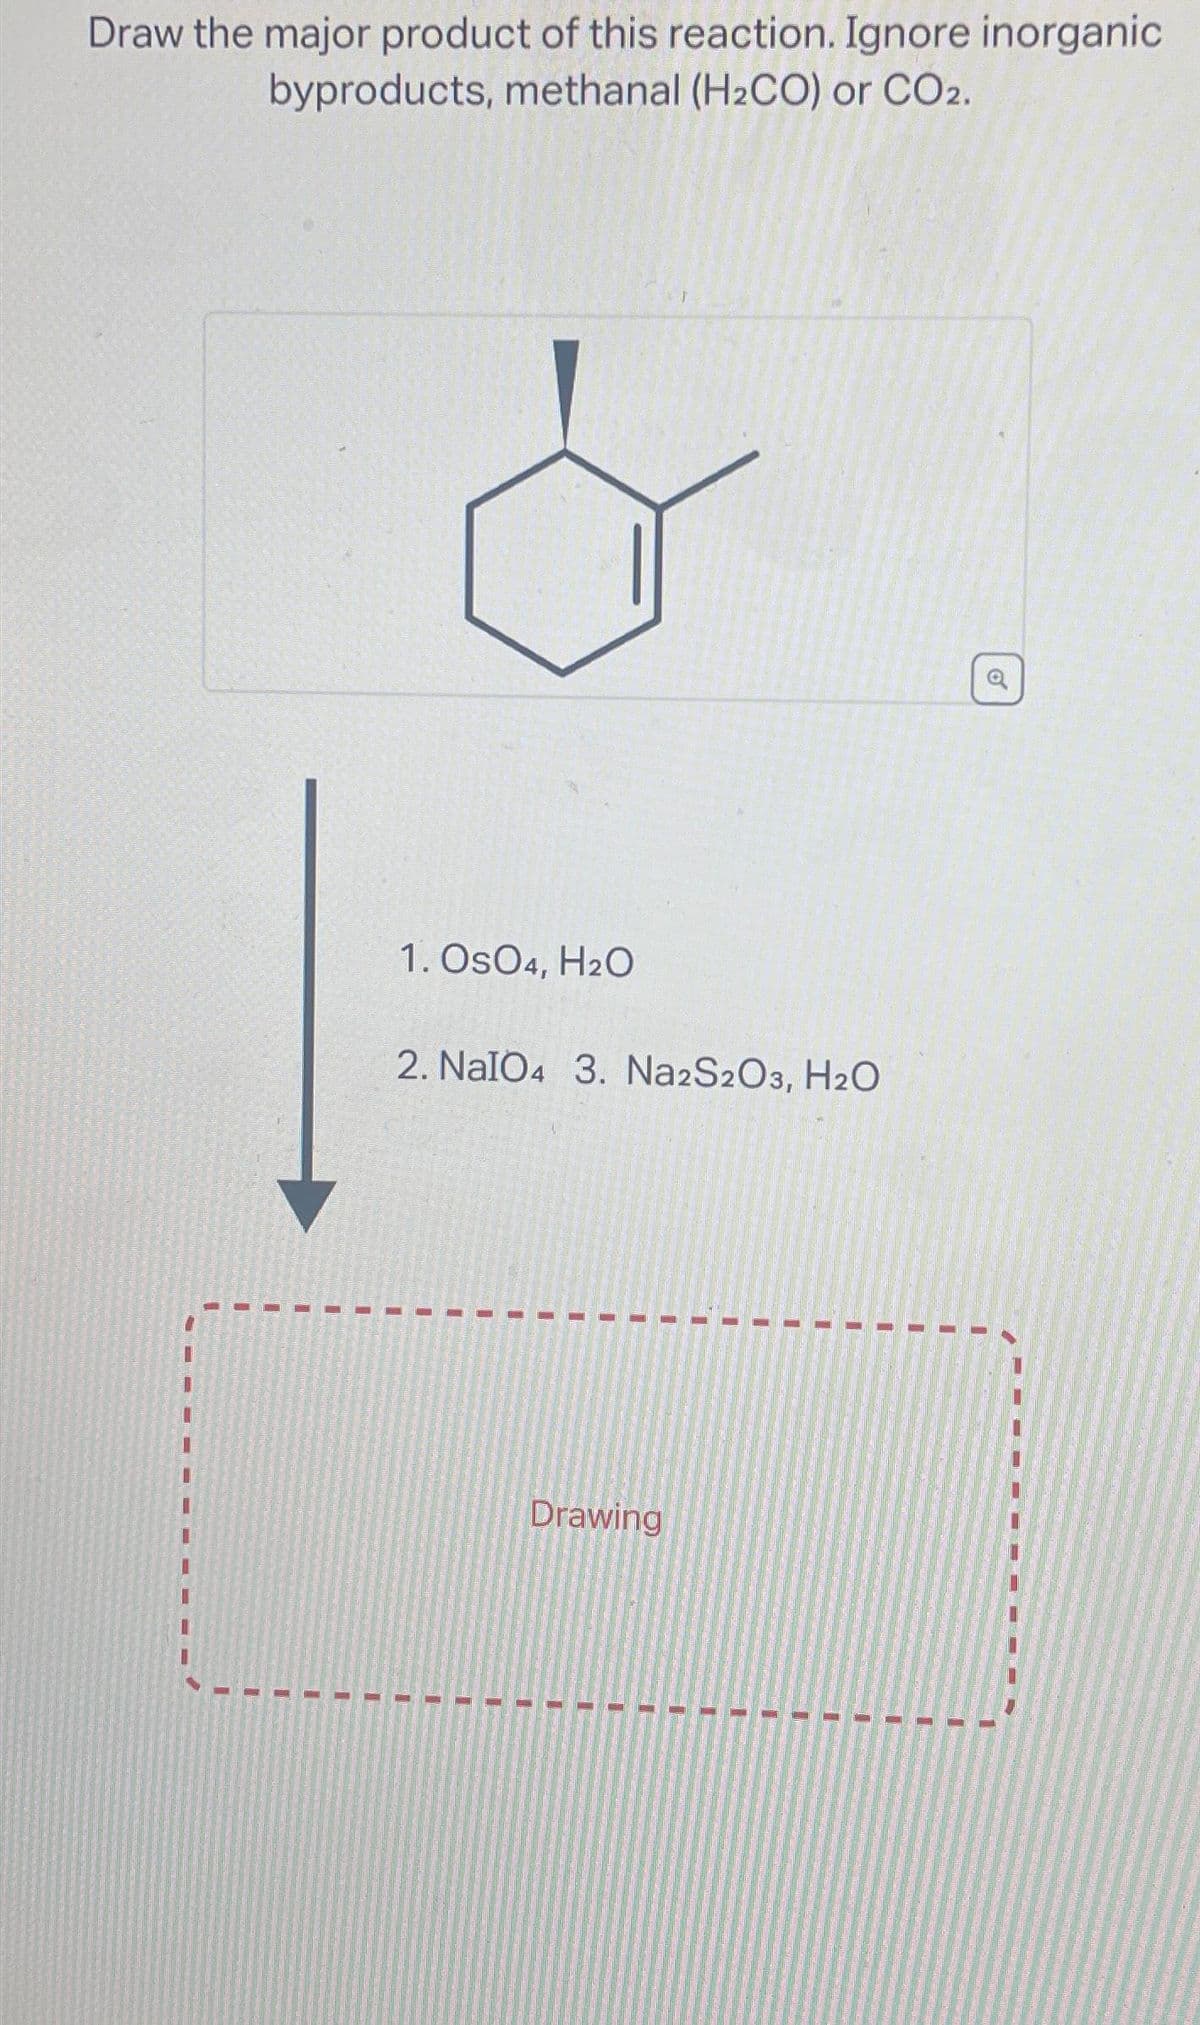 Draw the major product of this reaction. Ignore inorganic
byproducts, methanal (H₂CO) or CO2.
1
11
L
1
11
1. OSO4, H2O
2. NalO4 3. Na2S2O3, H2O
I
LE
U
Drawing
1